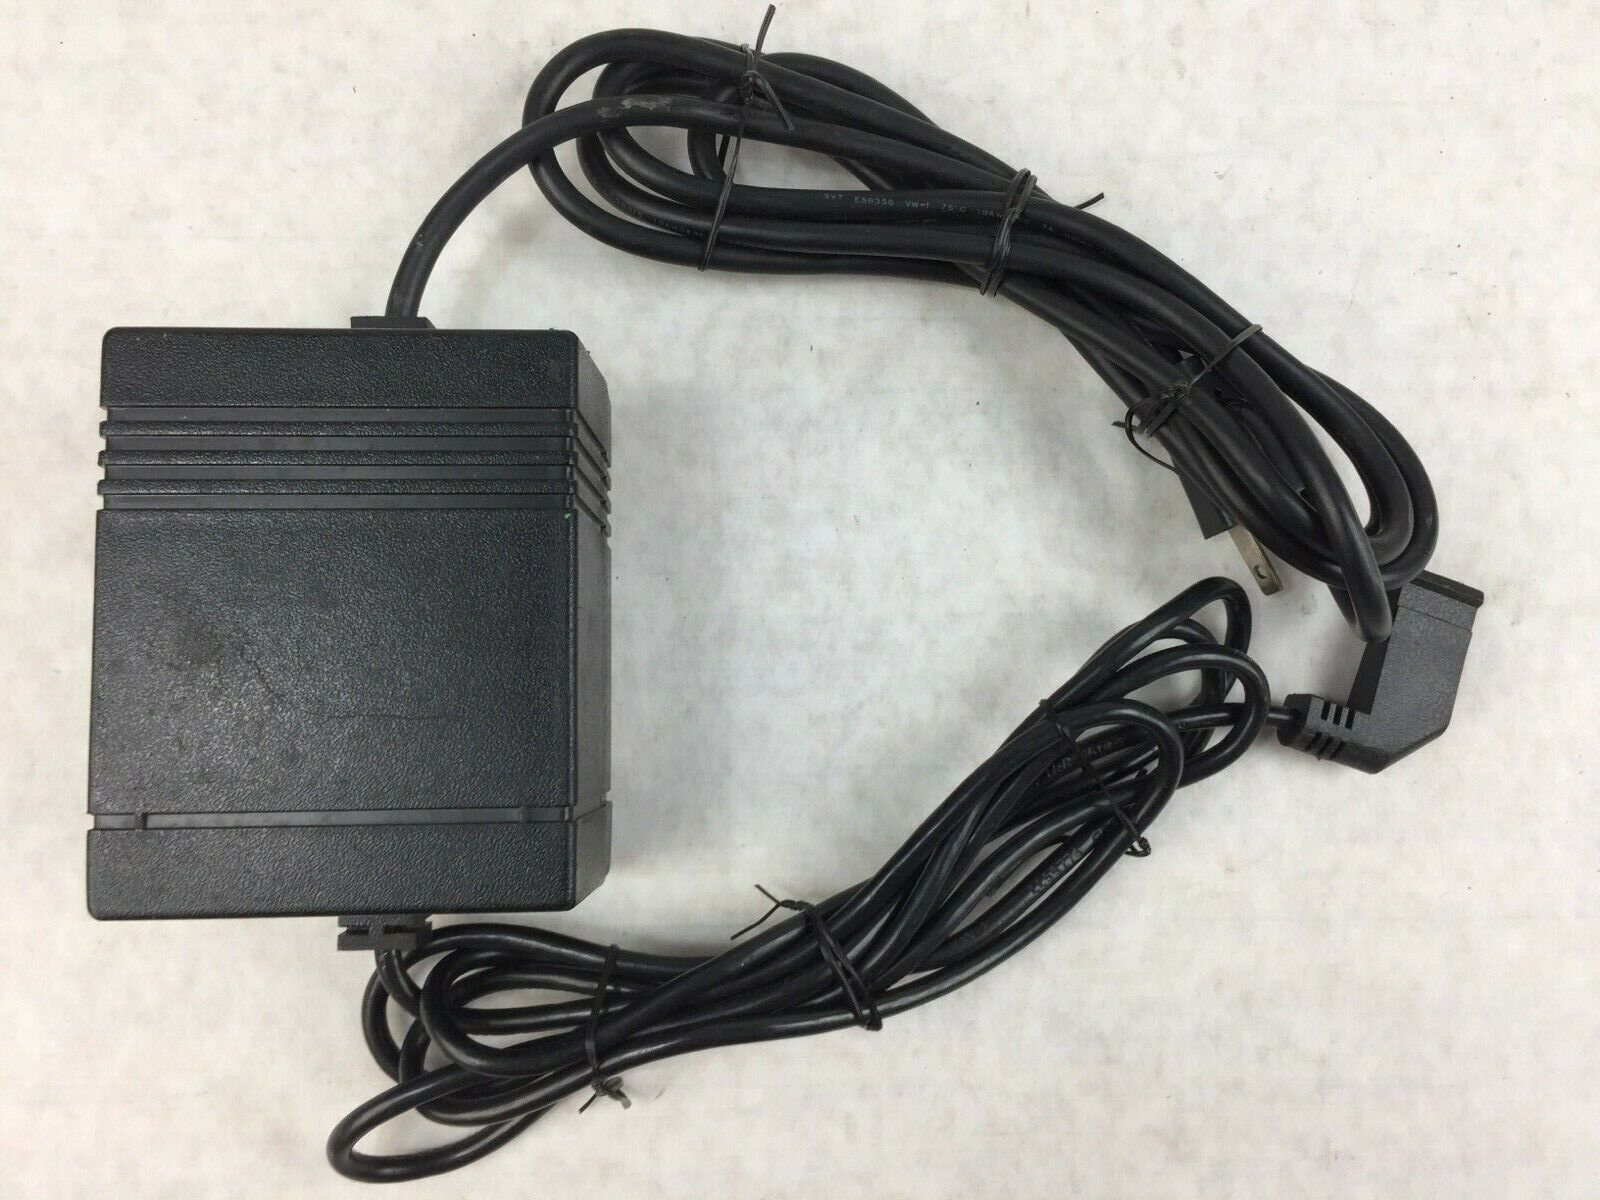 AT&T 20V Power Module 1 Safety Isolating Transformer 3301A (104200113)